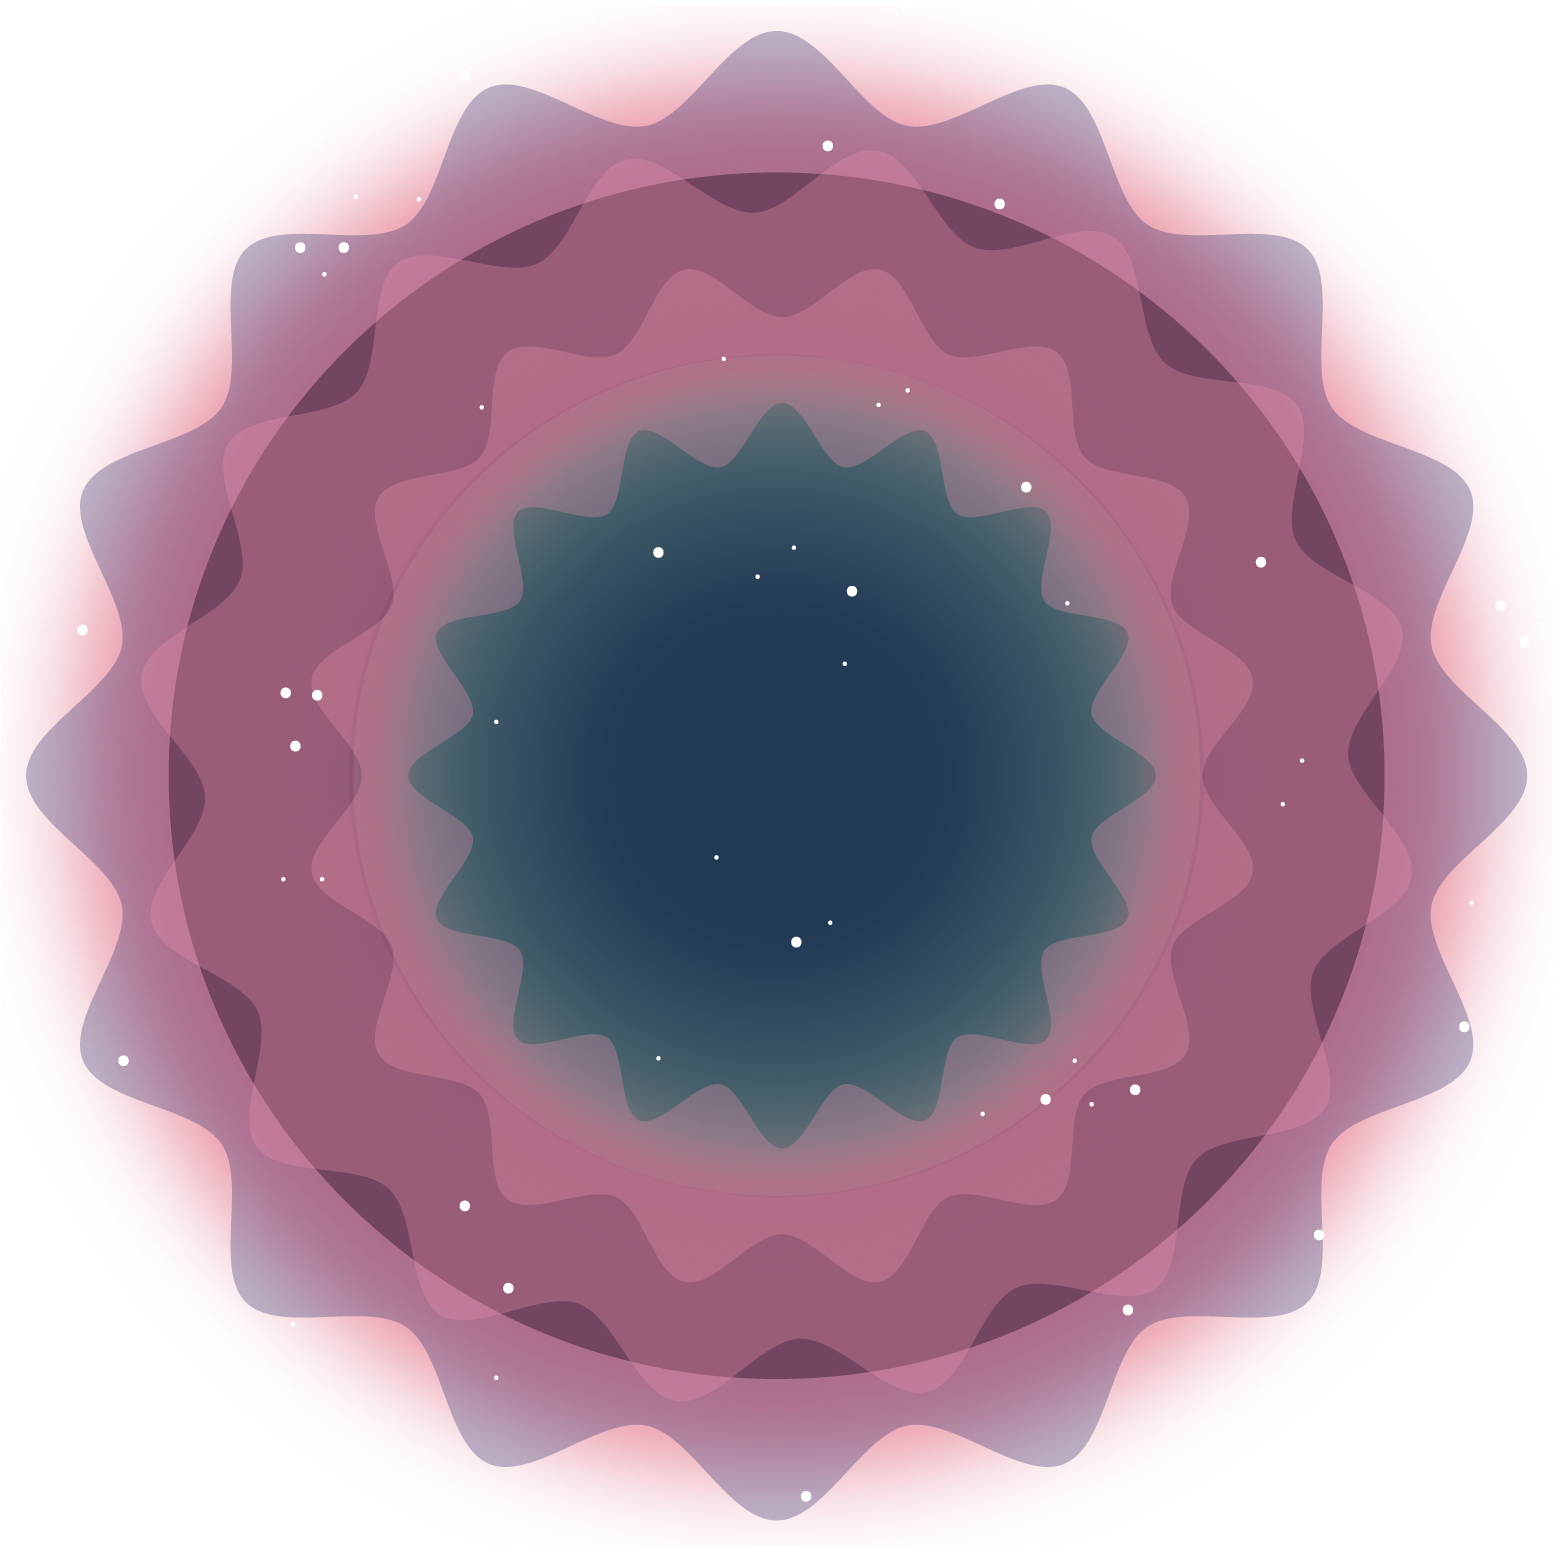 A large circular shape with rounded waves around the edge, this graphic gives the appearance of a flower. Smaller transparent circles with the same wavy edge are layered inward to create an inner starburst shape. While the outer rings are a muddy, light red color, the inner starburst shape is a darker color with green around its edge and dark blue in the center. White dots representing stars speckle the image.